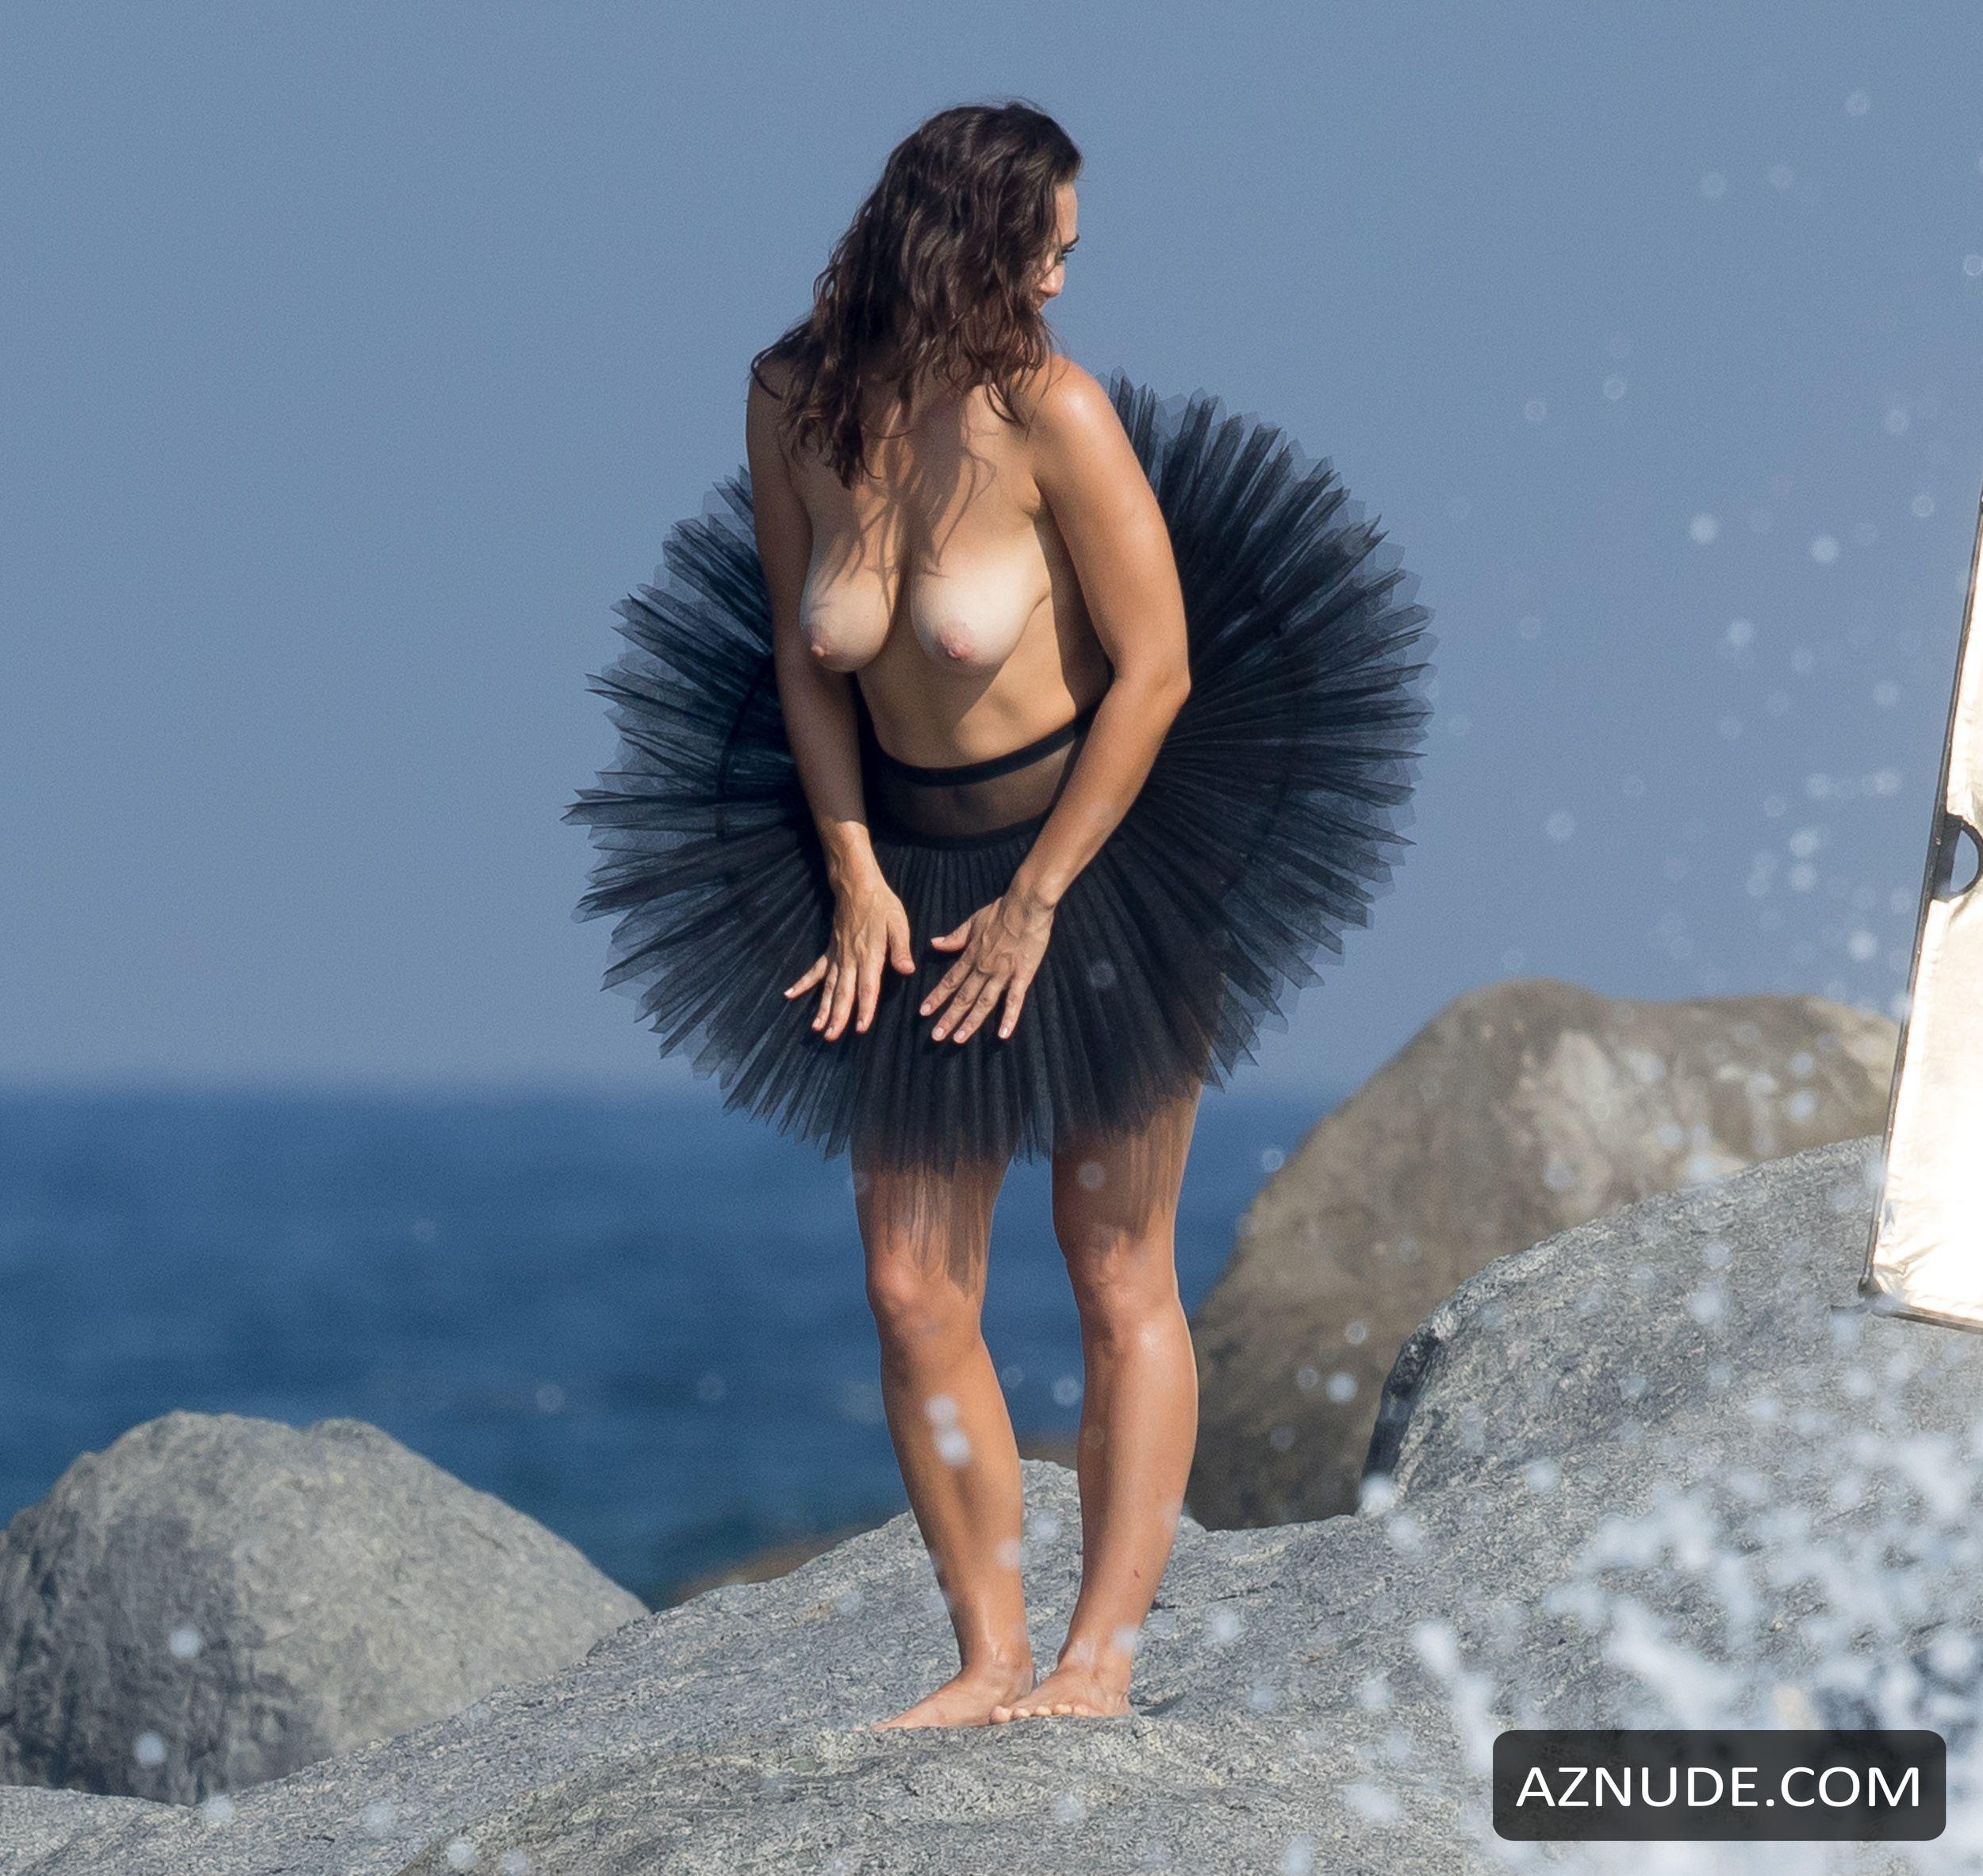 Myla Dalbesio Nude For A New Photoshoot For Sports Illustrated Swimsuit